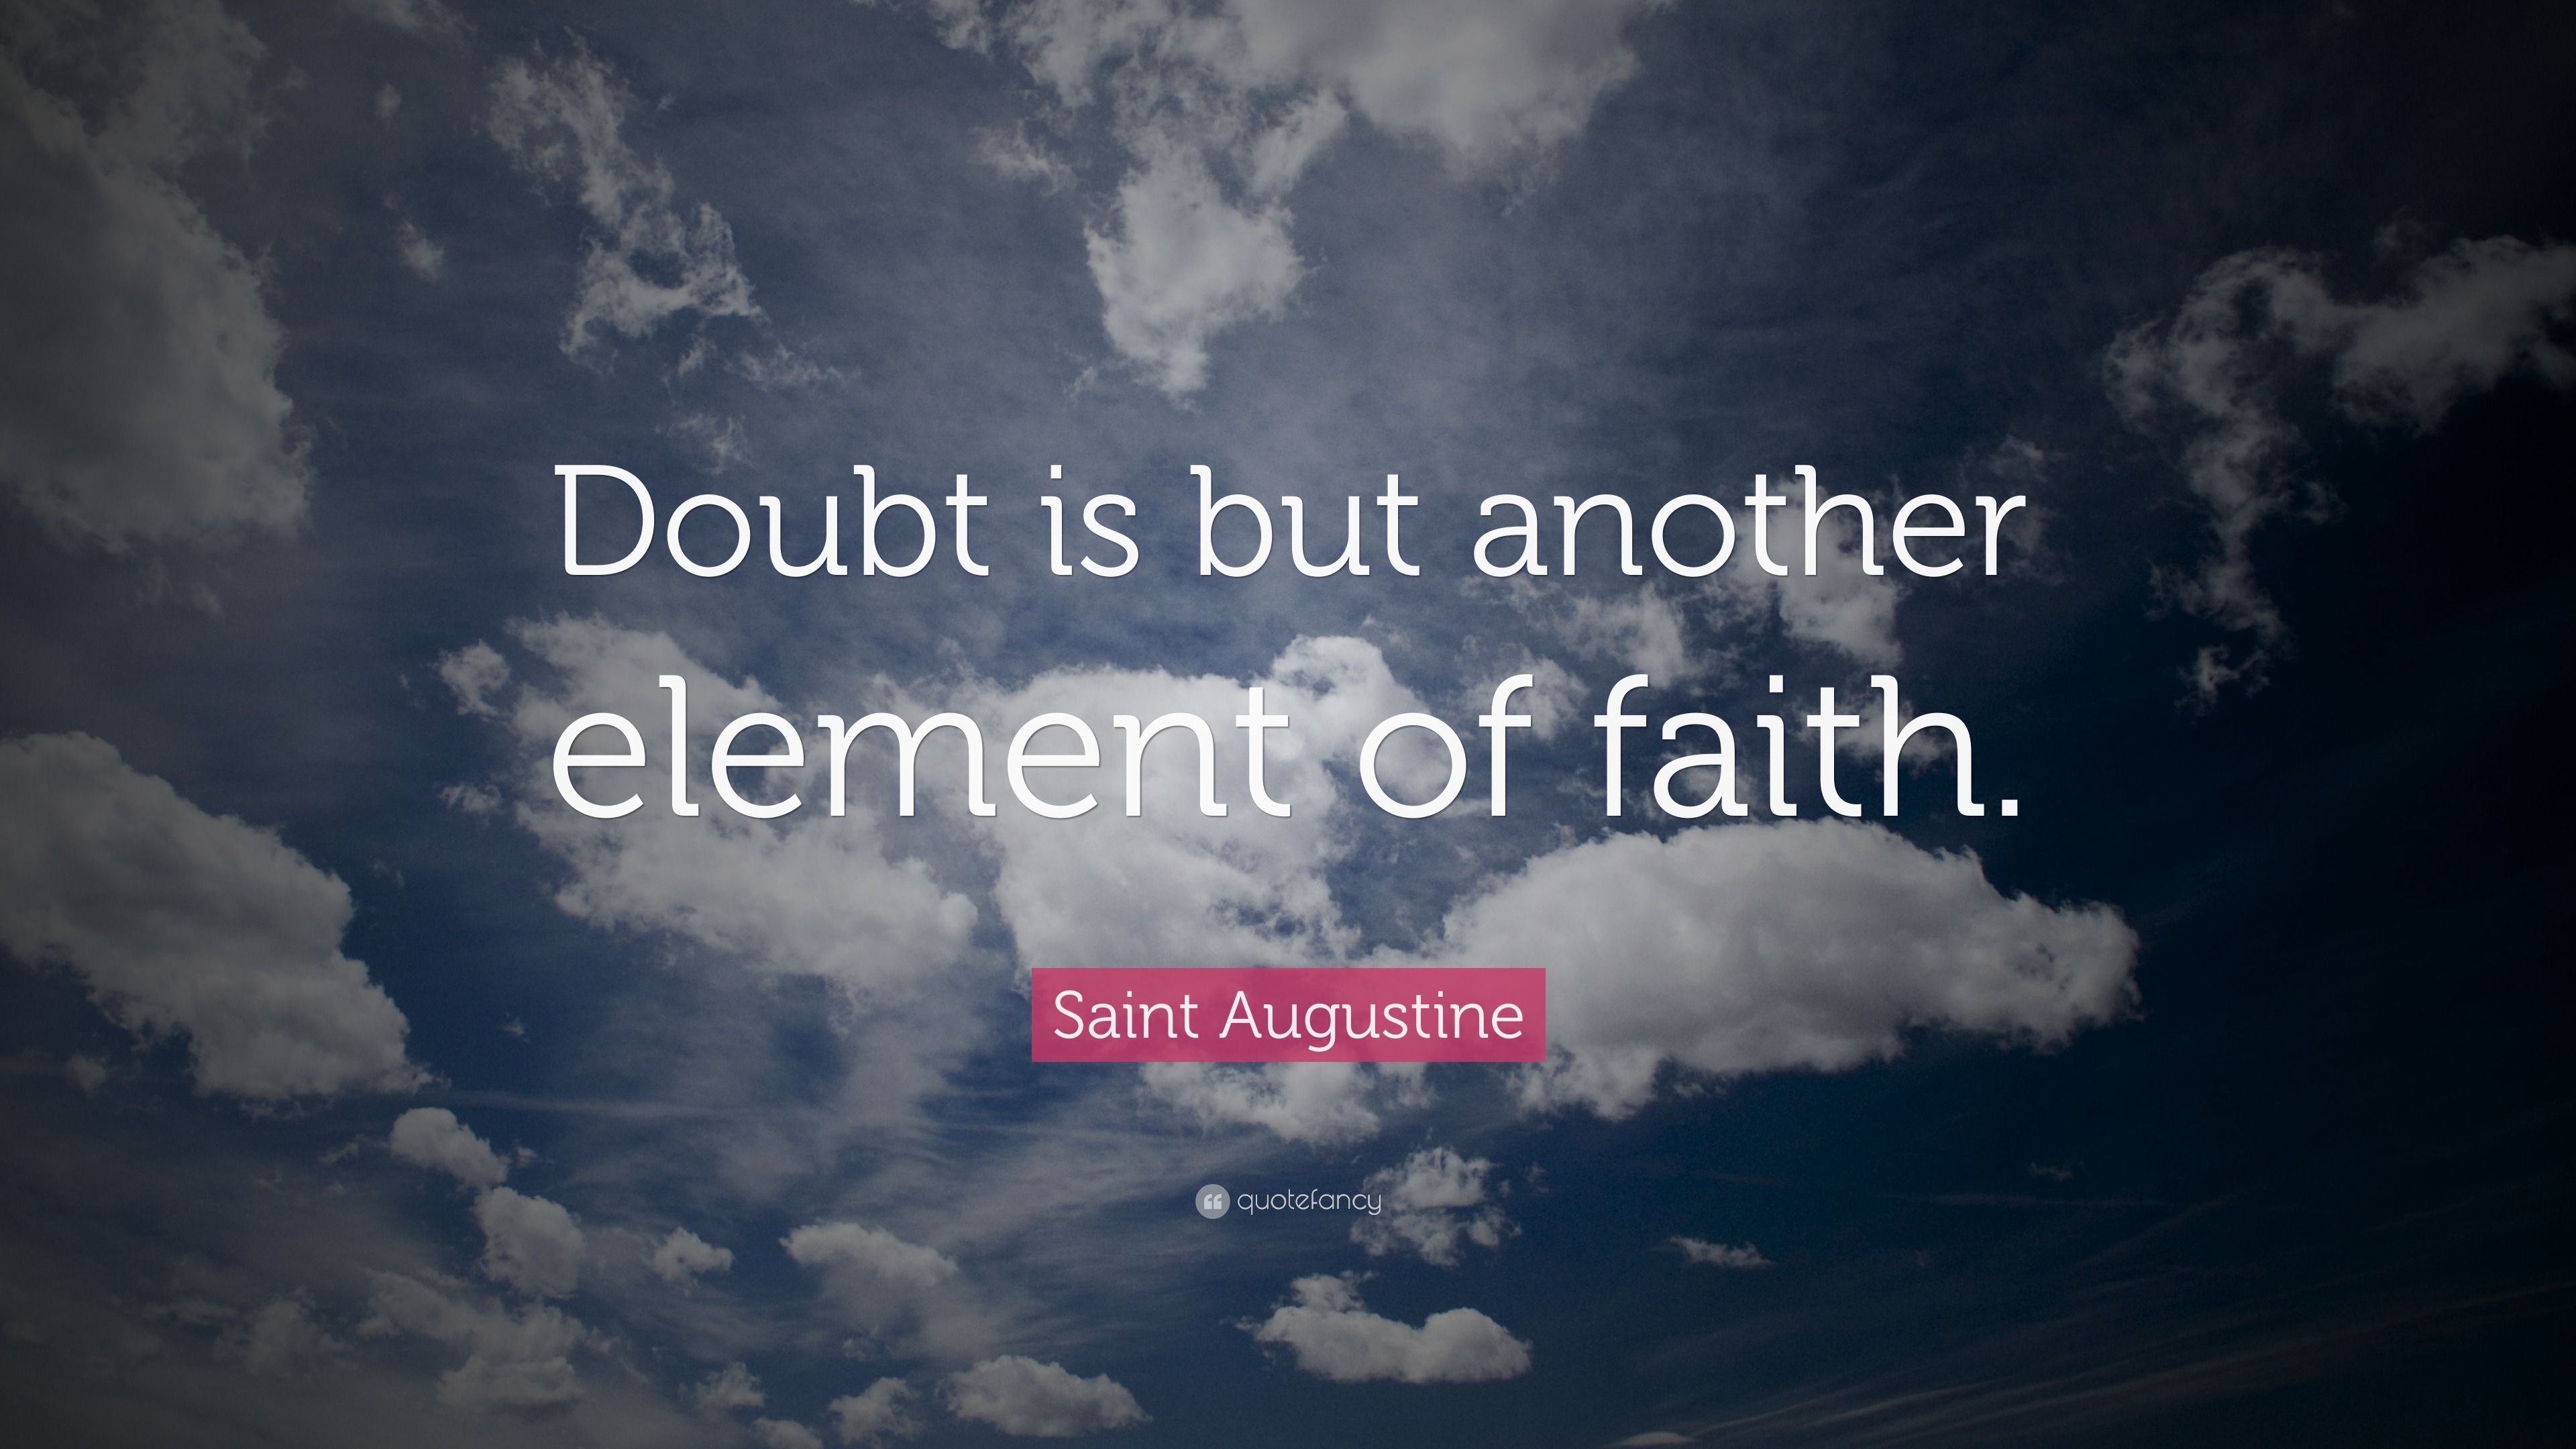 Saint Augustine Quotes (100 wallpapers) - Quotefancy